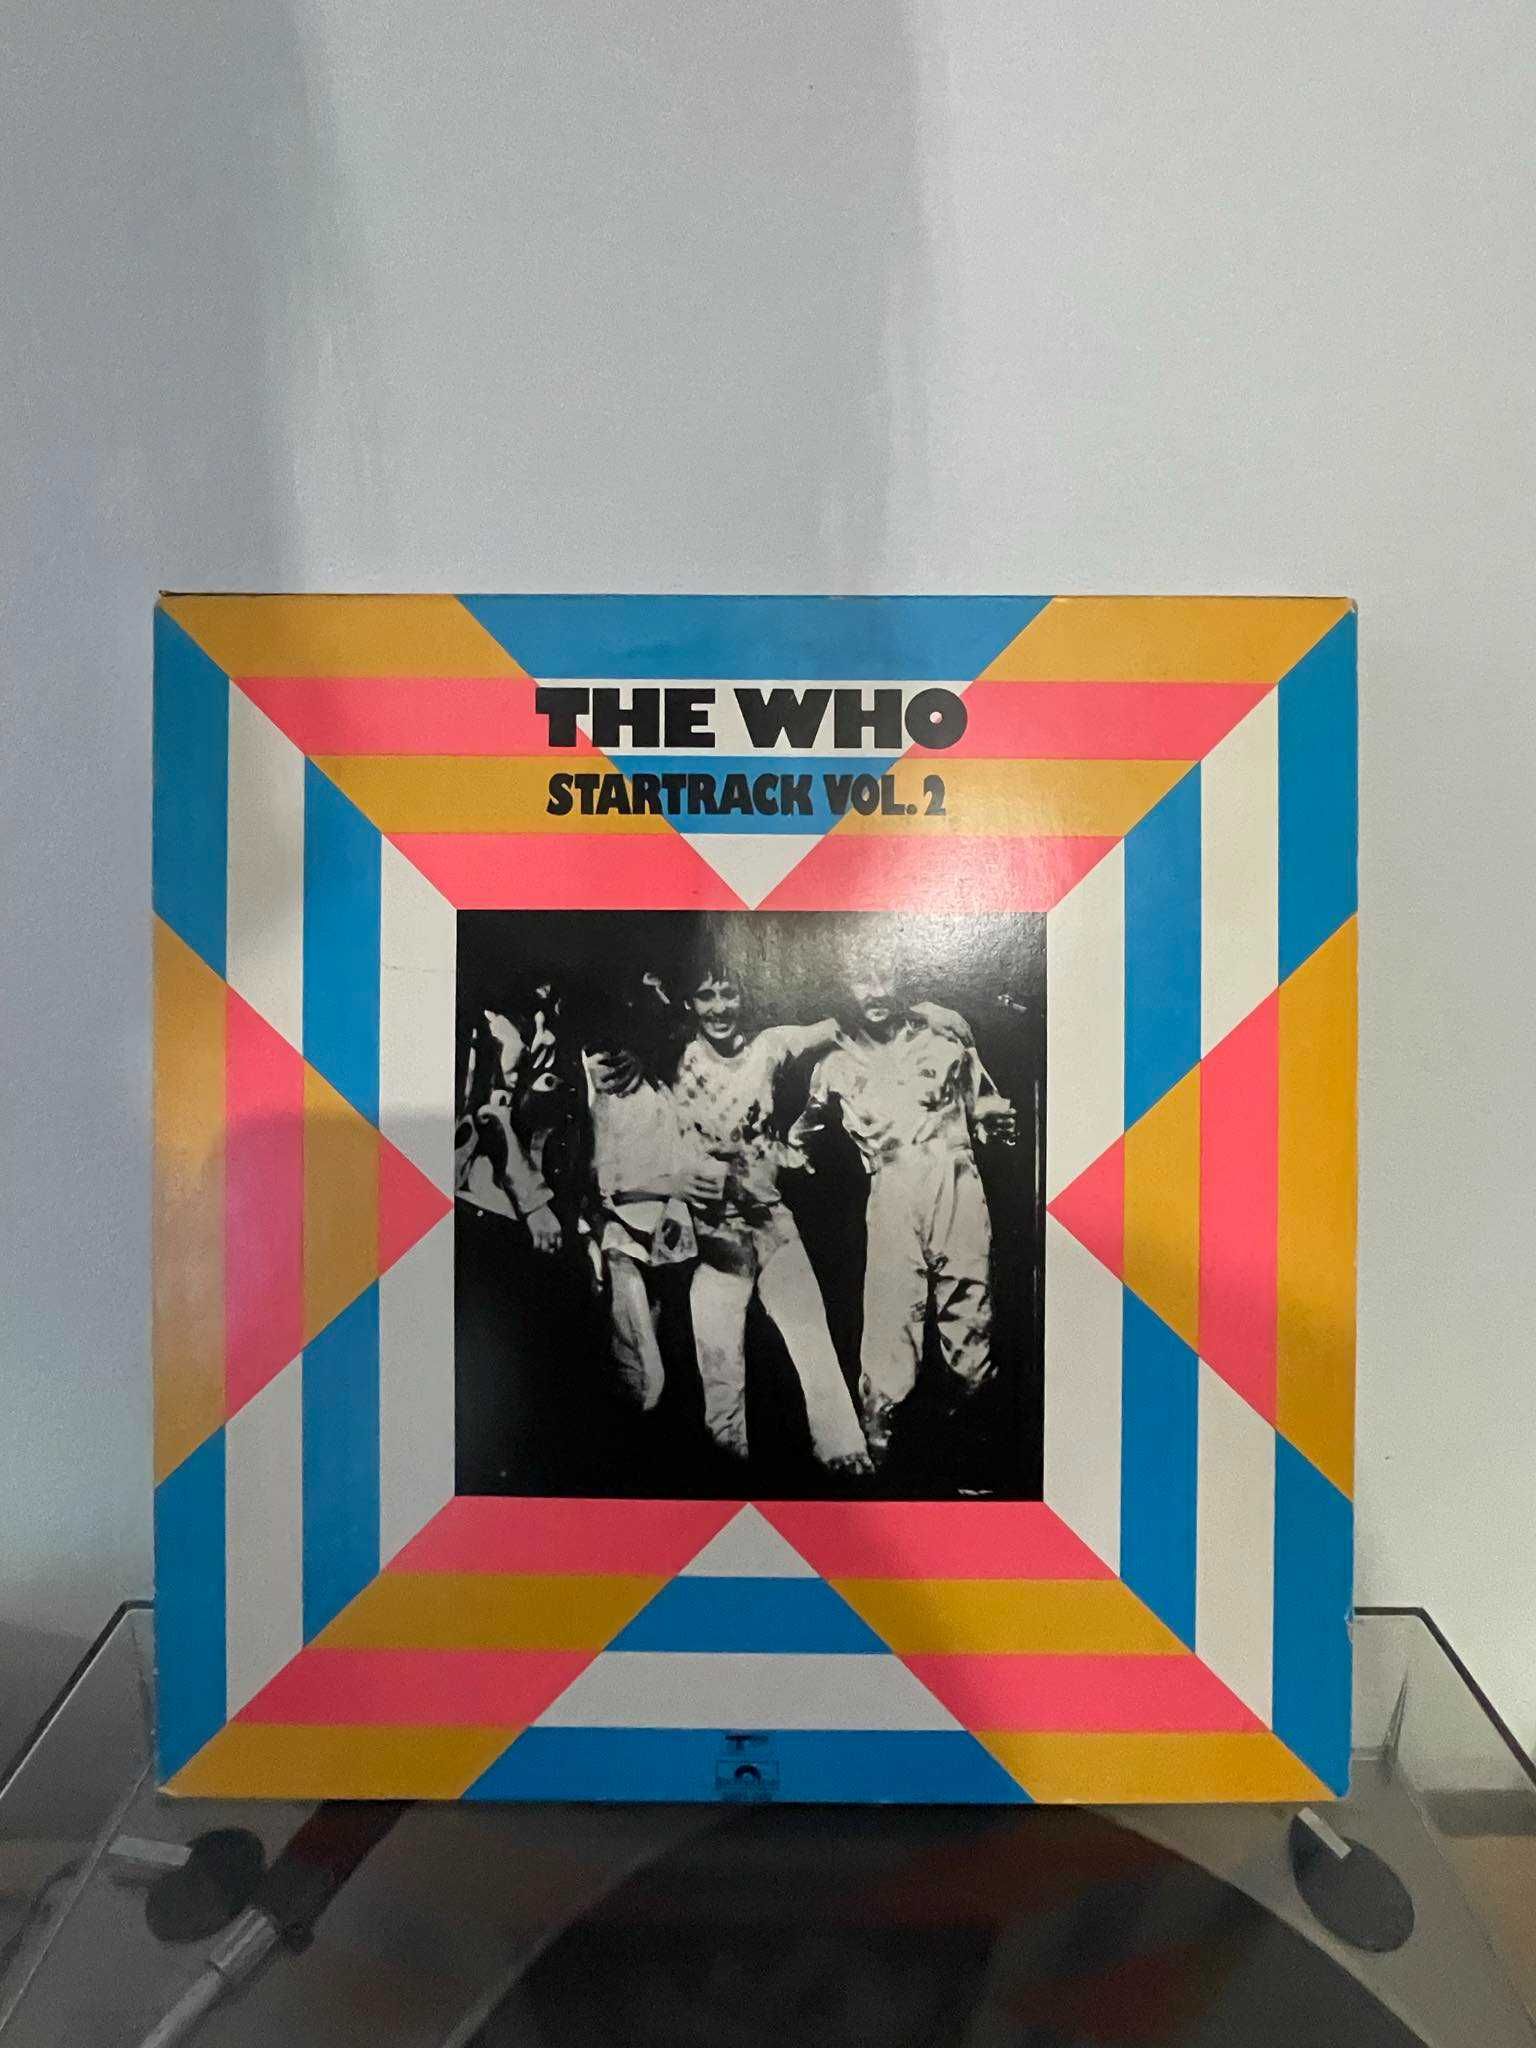 The Who – Startrack Vol. 2